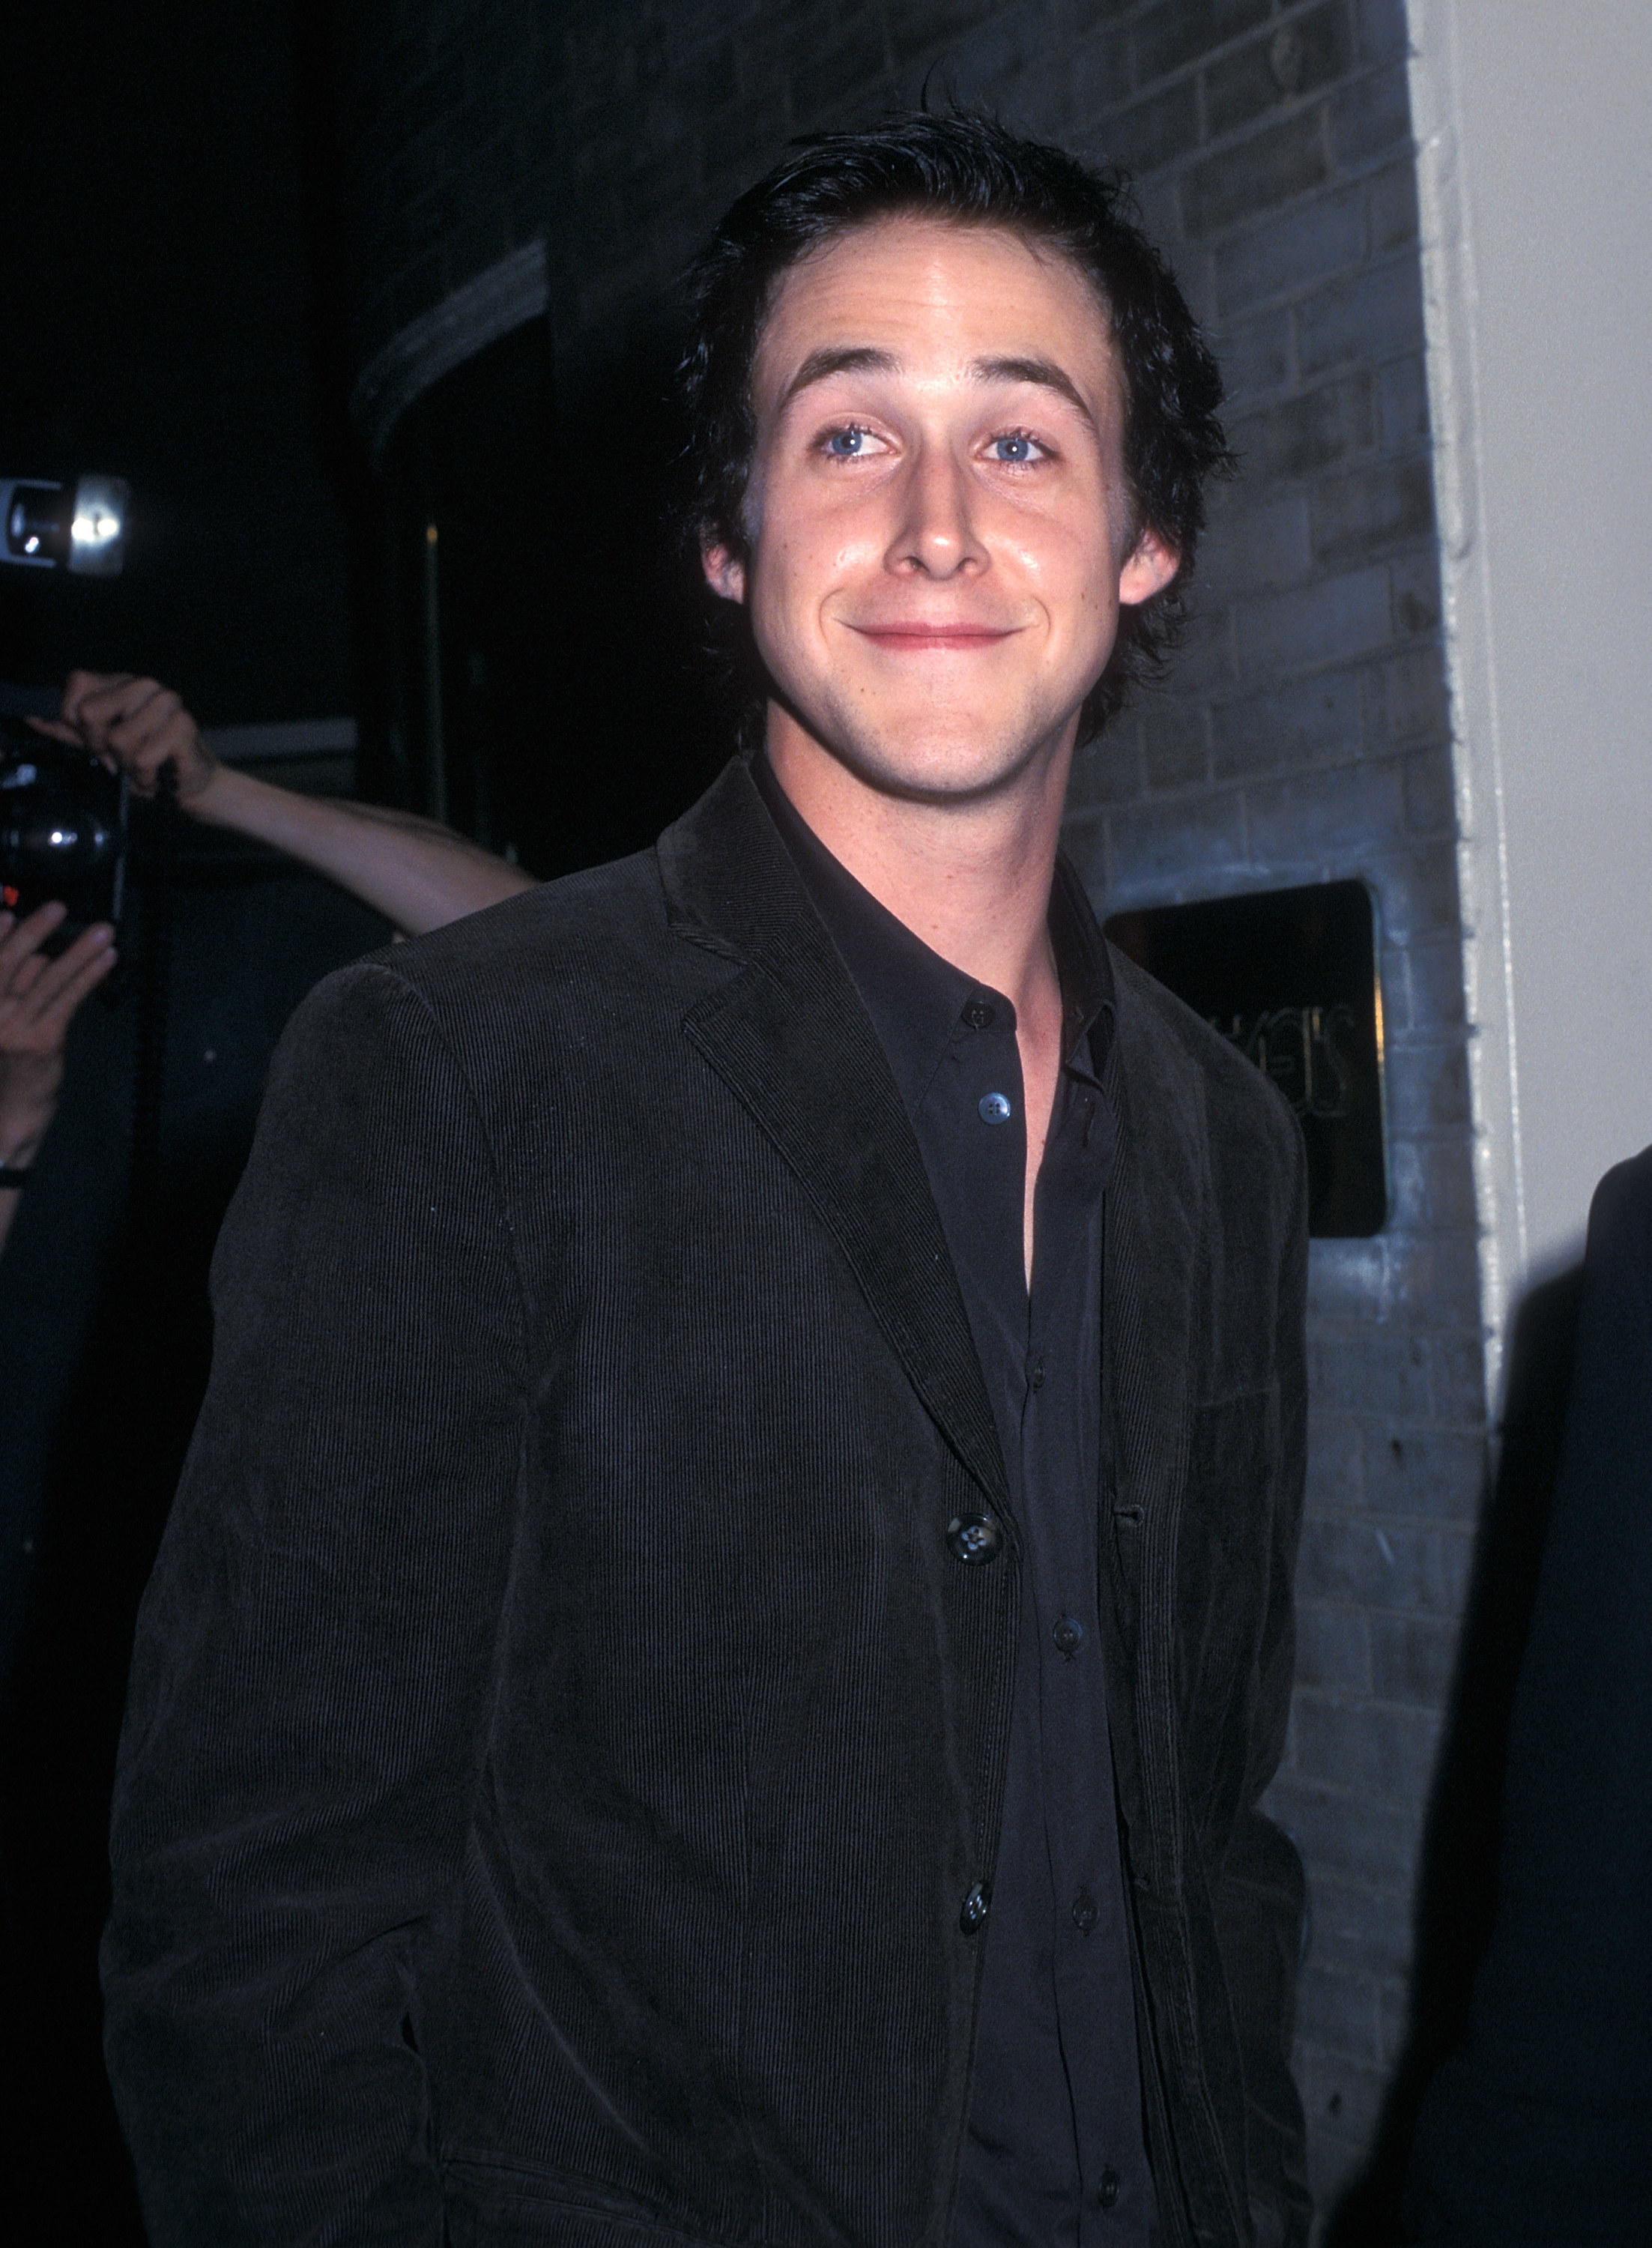 Ryan Gosling at the premiere of Murder by Numbers